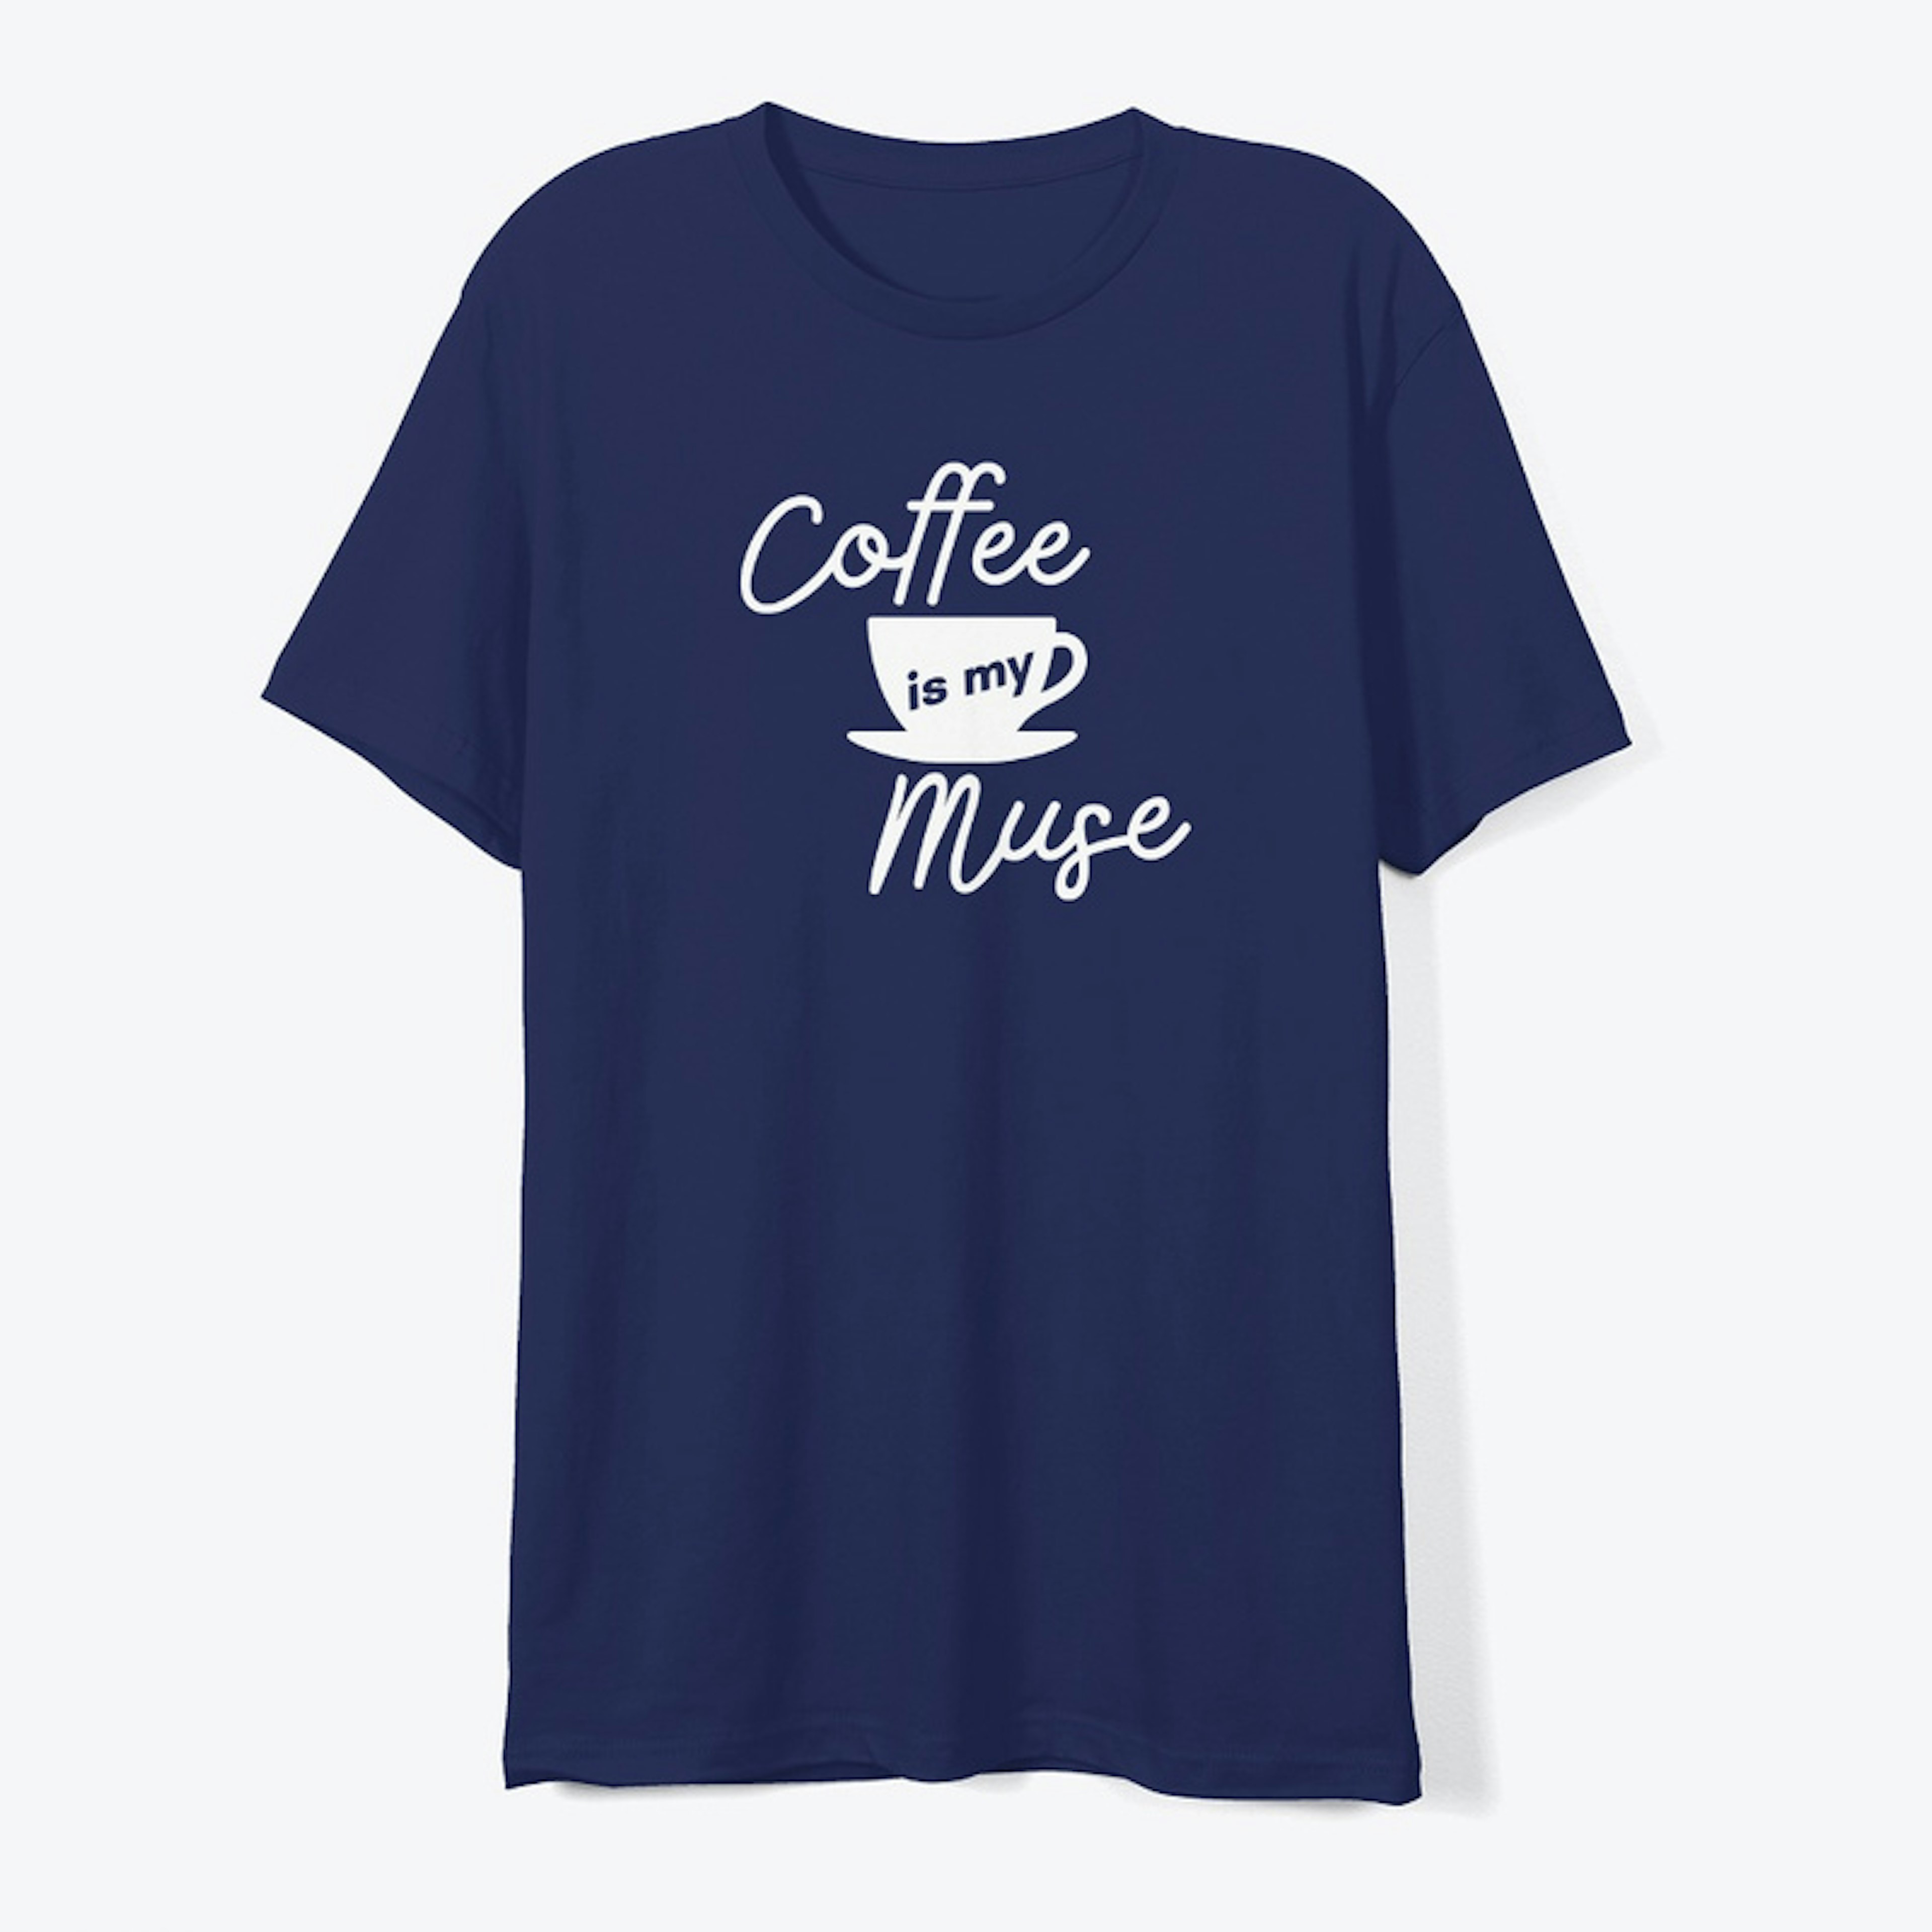 Coffee is my Muse (white)